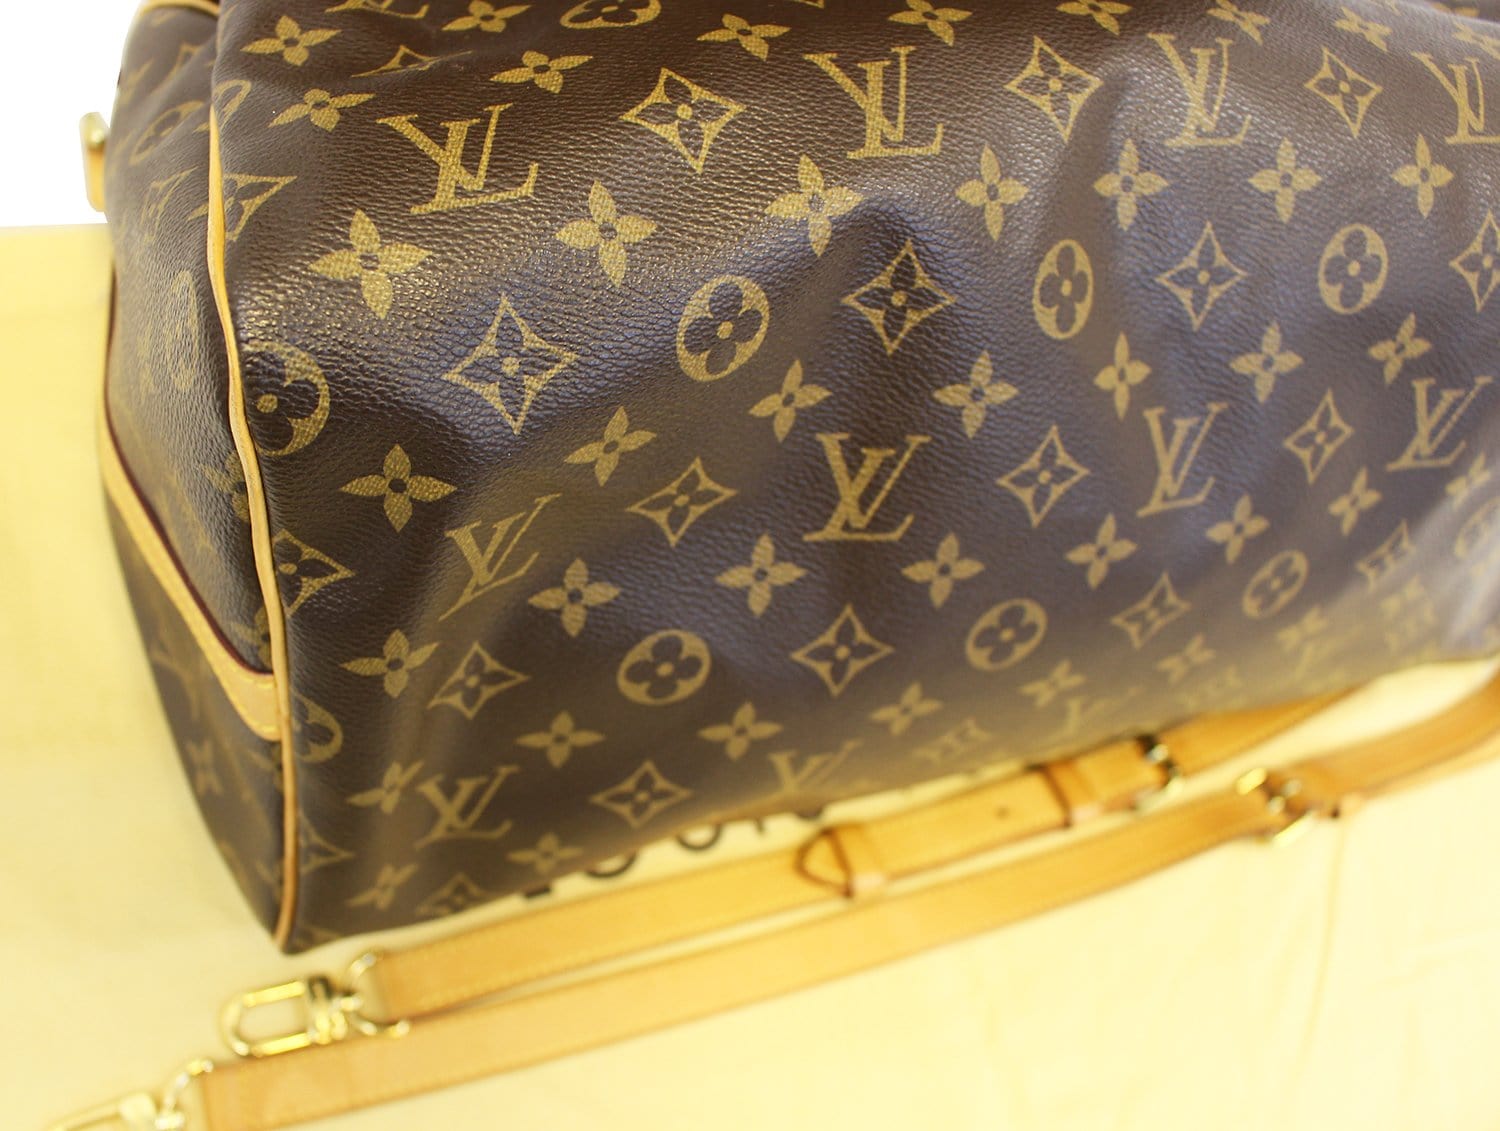 Louis Vuitton Speedy Vs Gucci Boston Bag | Confederated Tribes of the Umatilla Indian Reservation